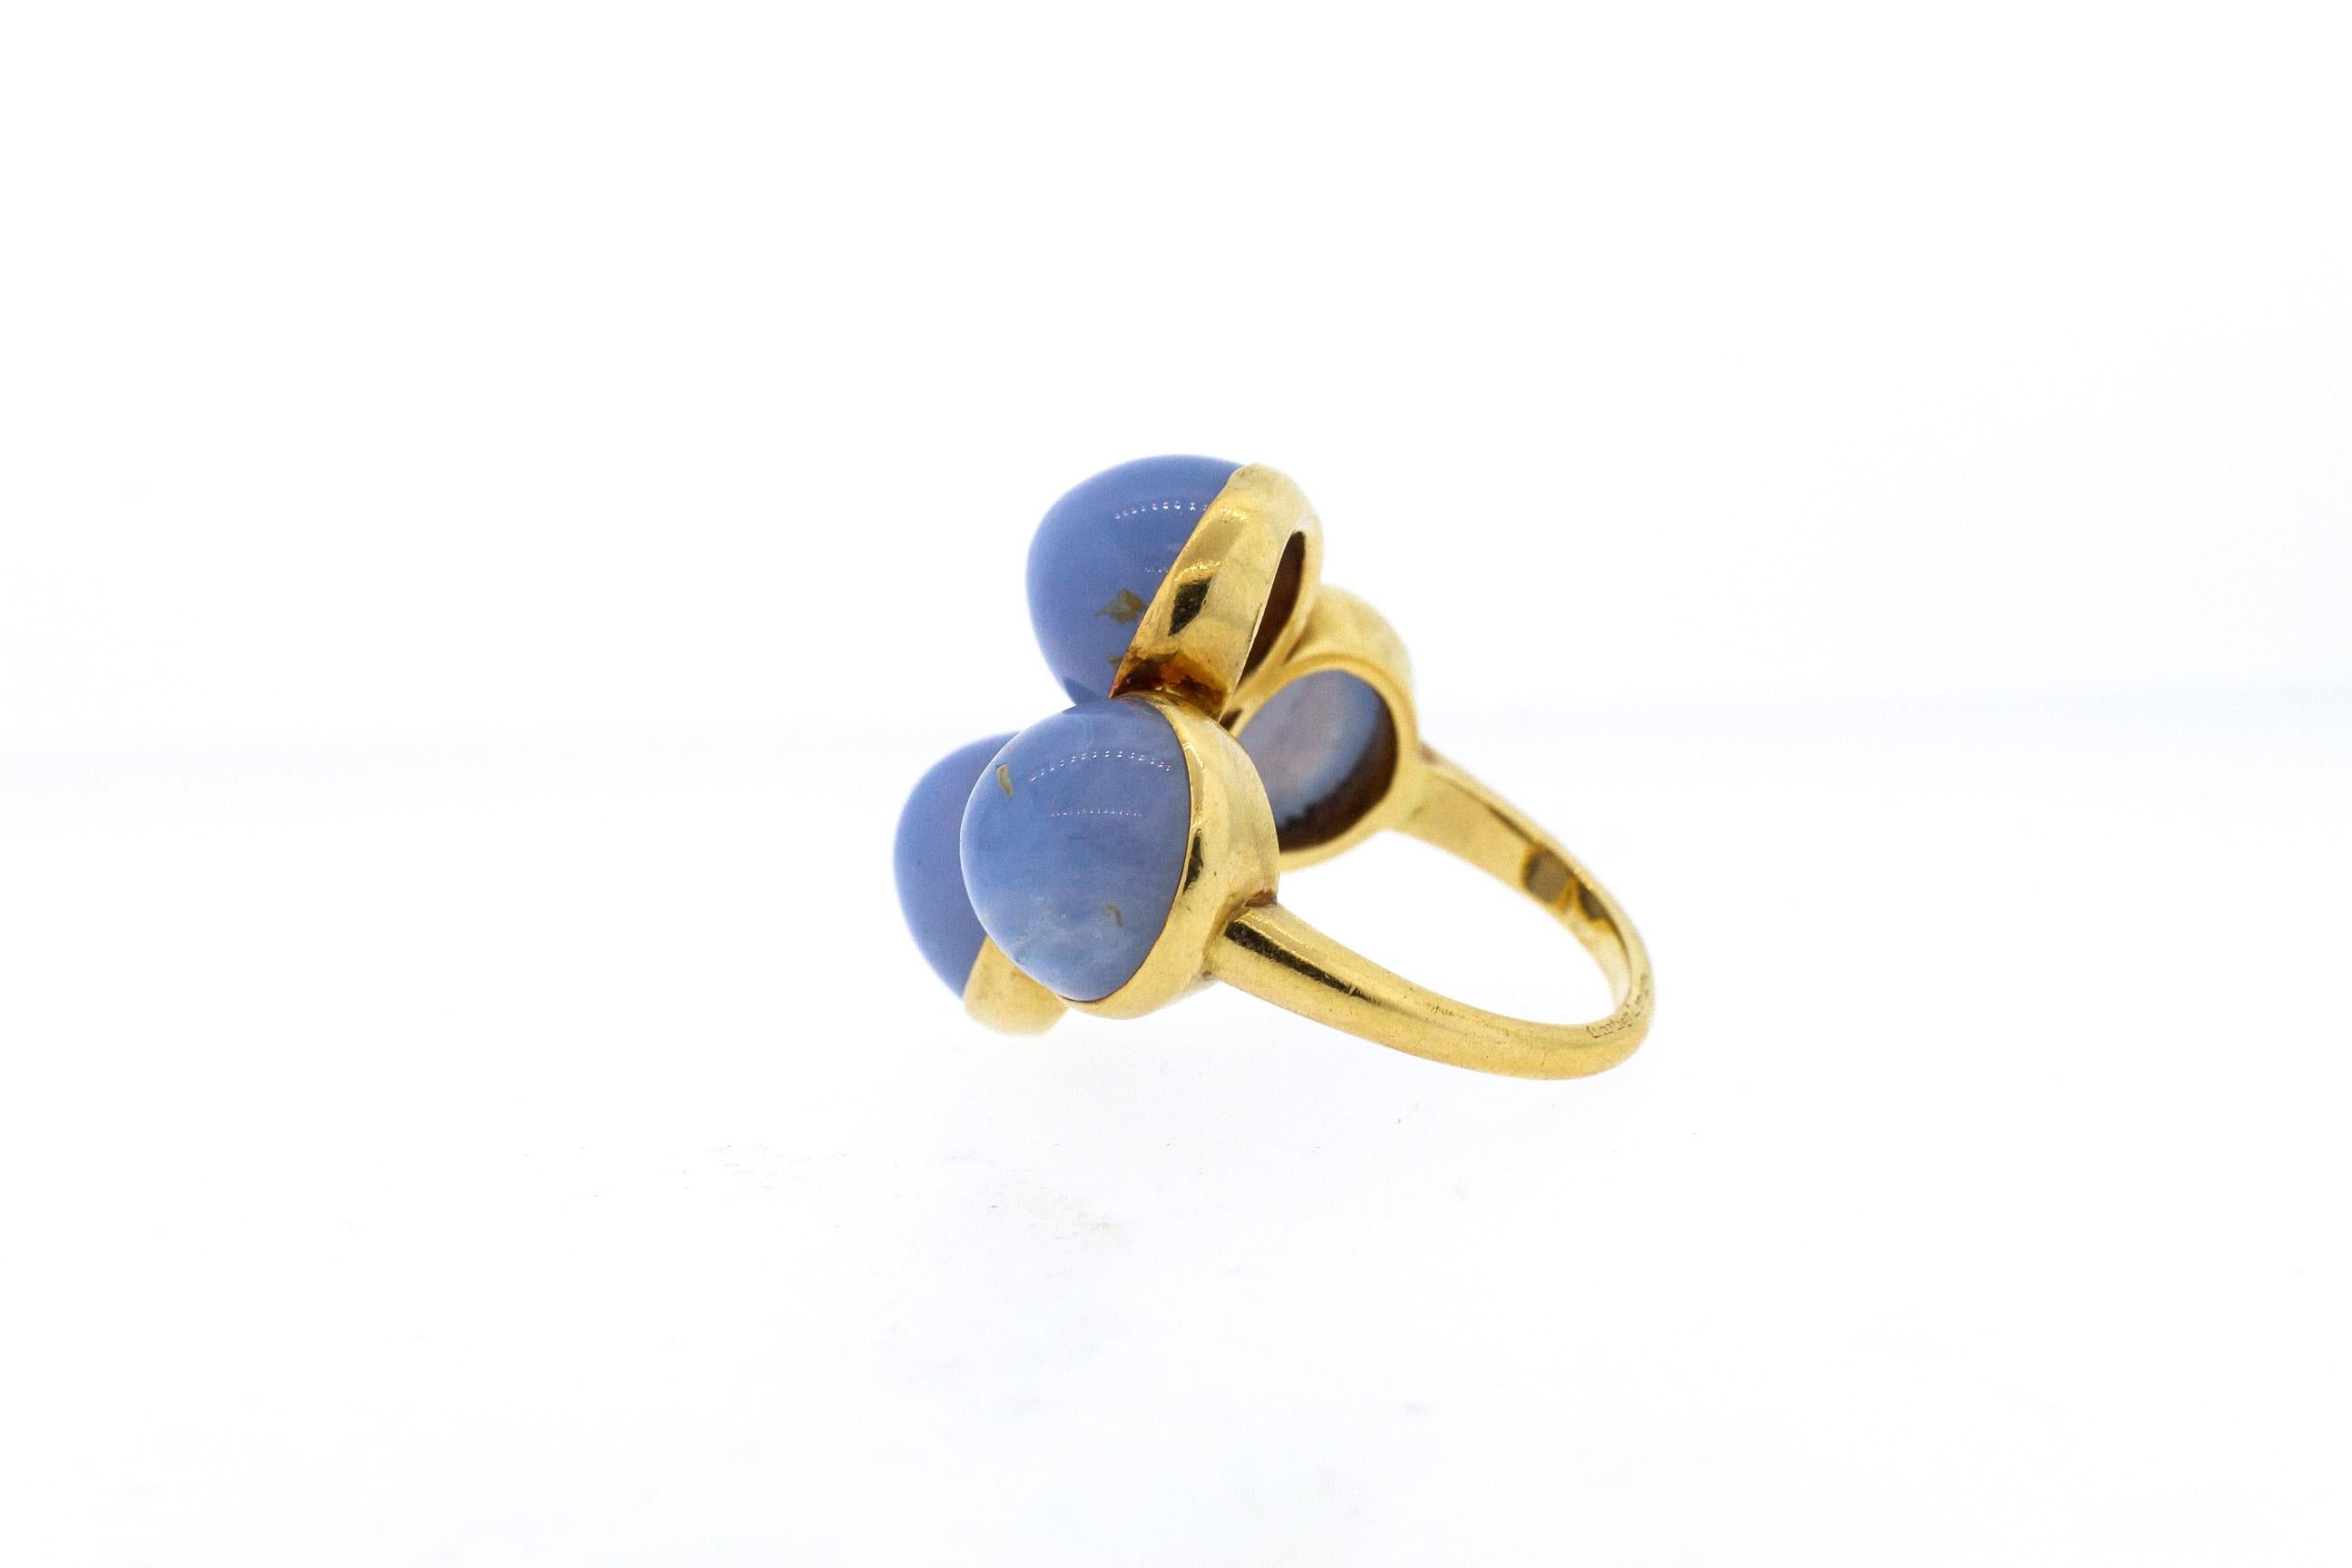 A vintage 18k yellow gold Cartier ring set with cabochon chalcedony, circa 1970. The ring is a true funky design for an unusual cocktail ring. The ring is signed Cartier London, where they often created avant- garde designs to reflect modern styles.